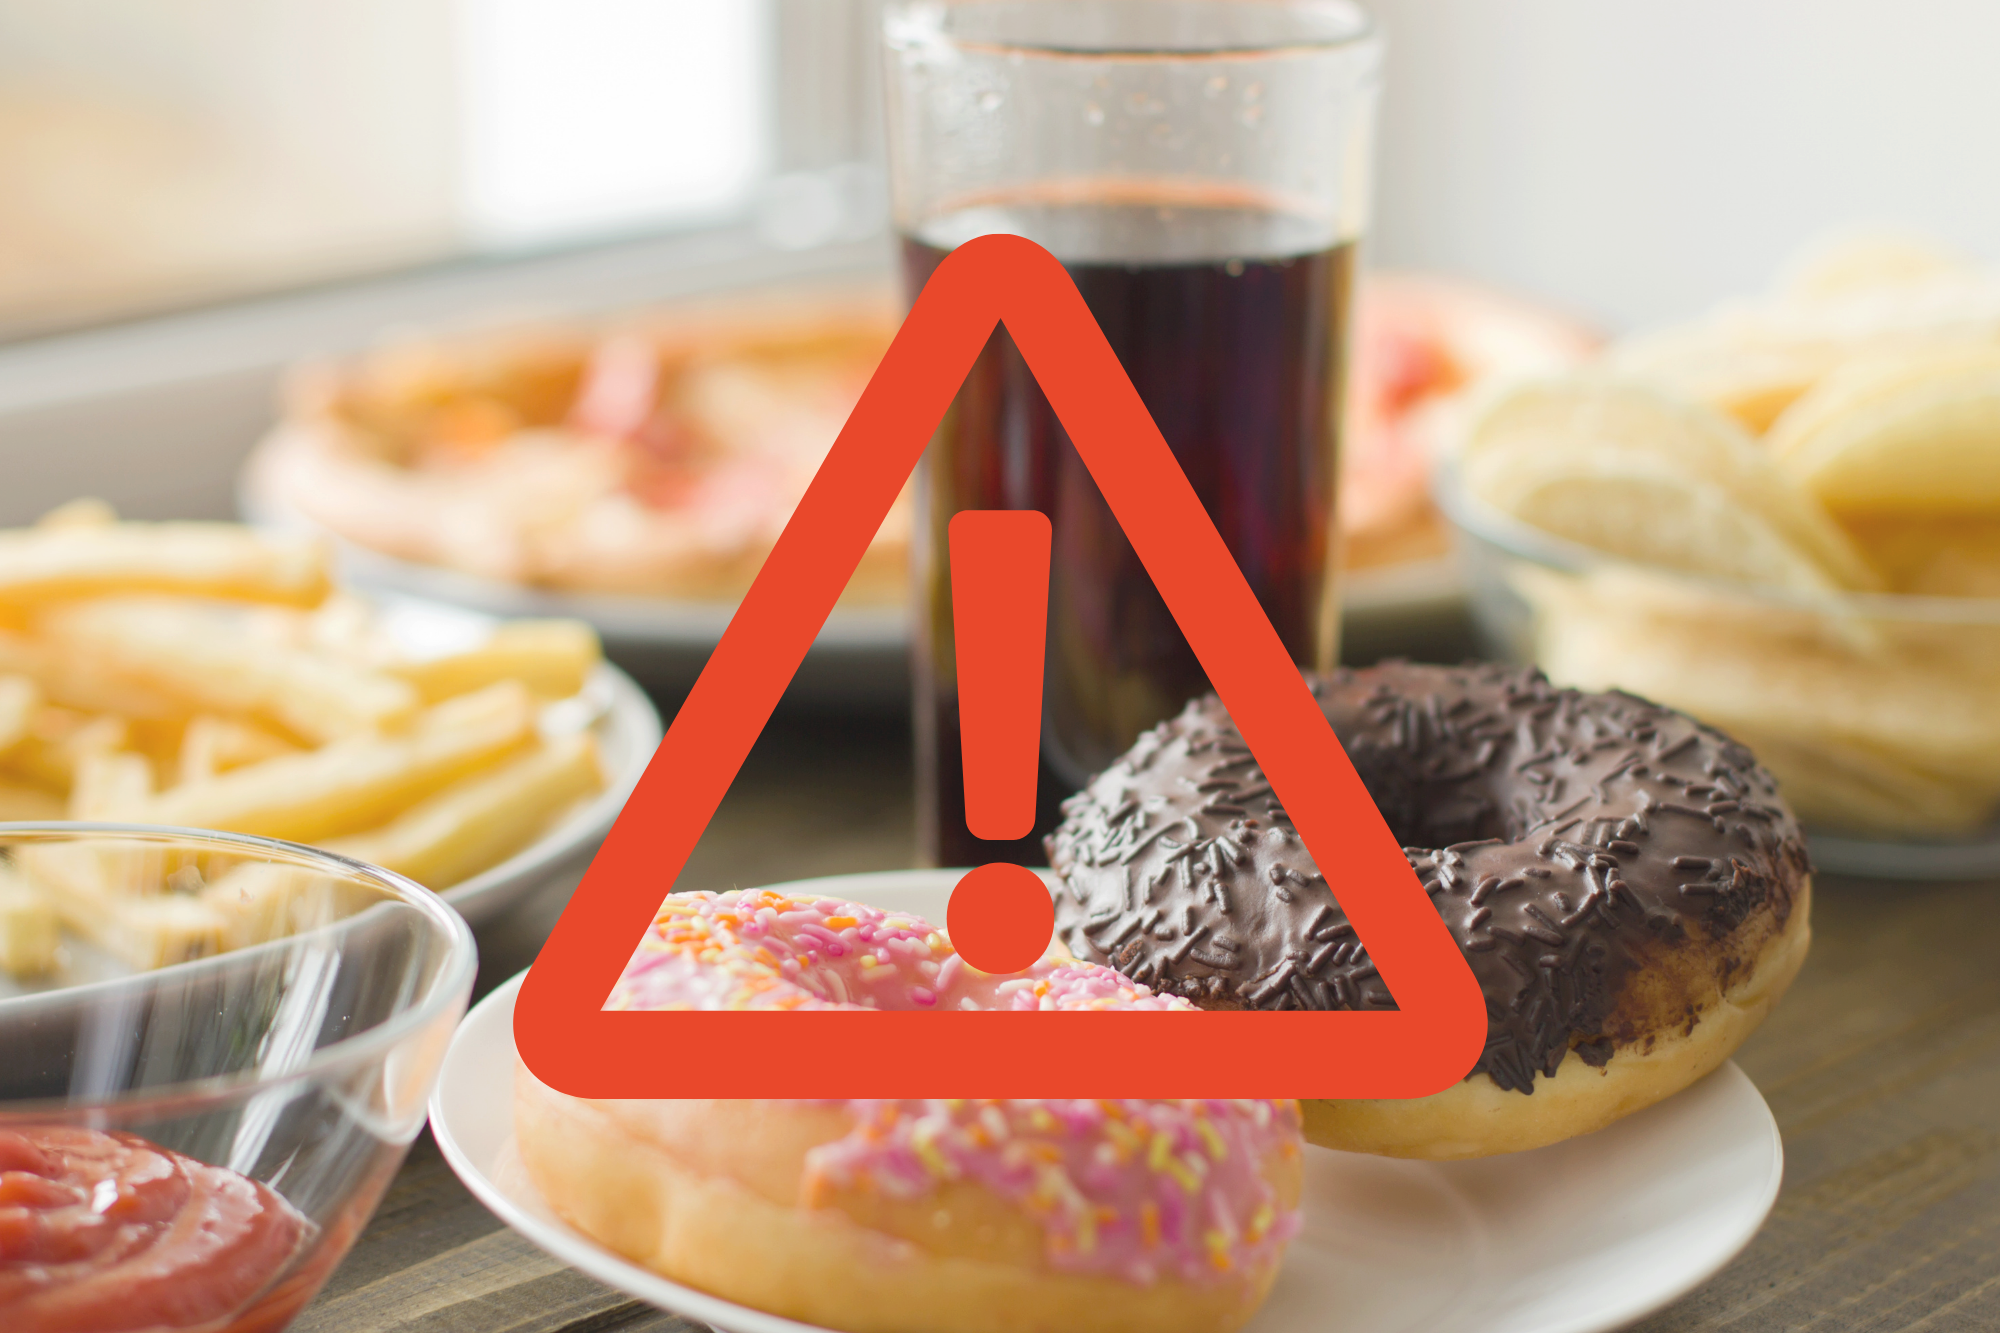 unhealthy sugary foods and drinks